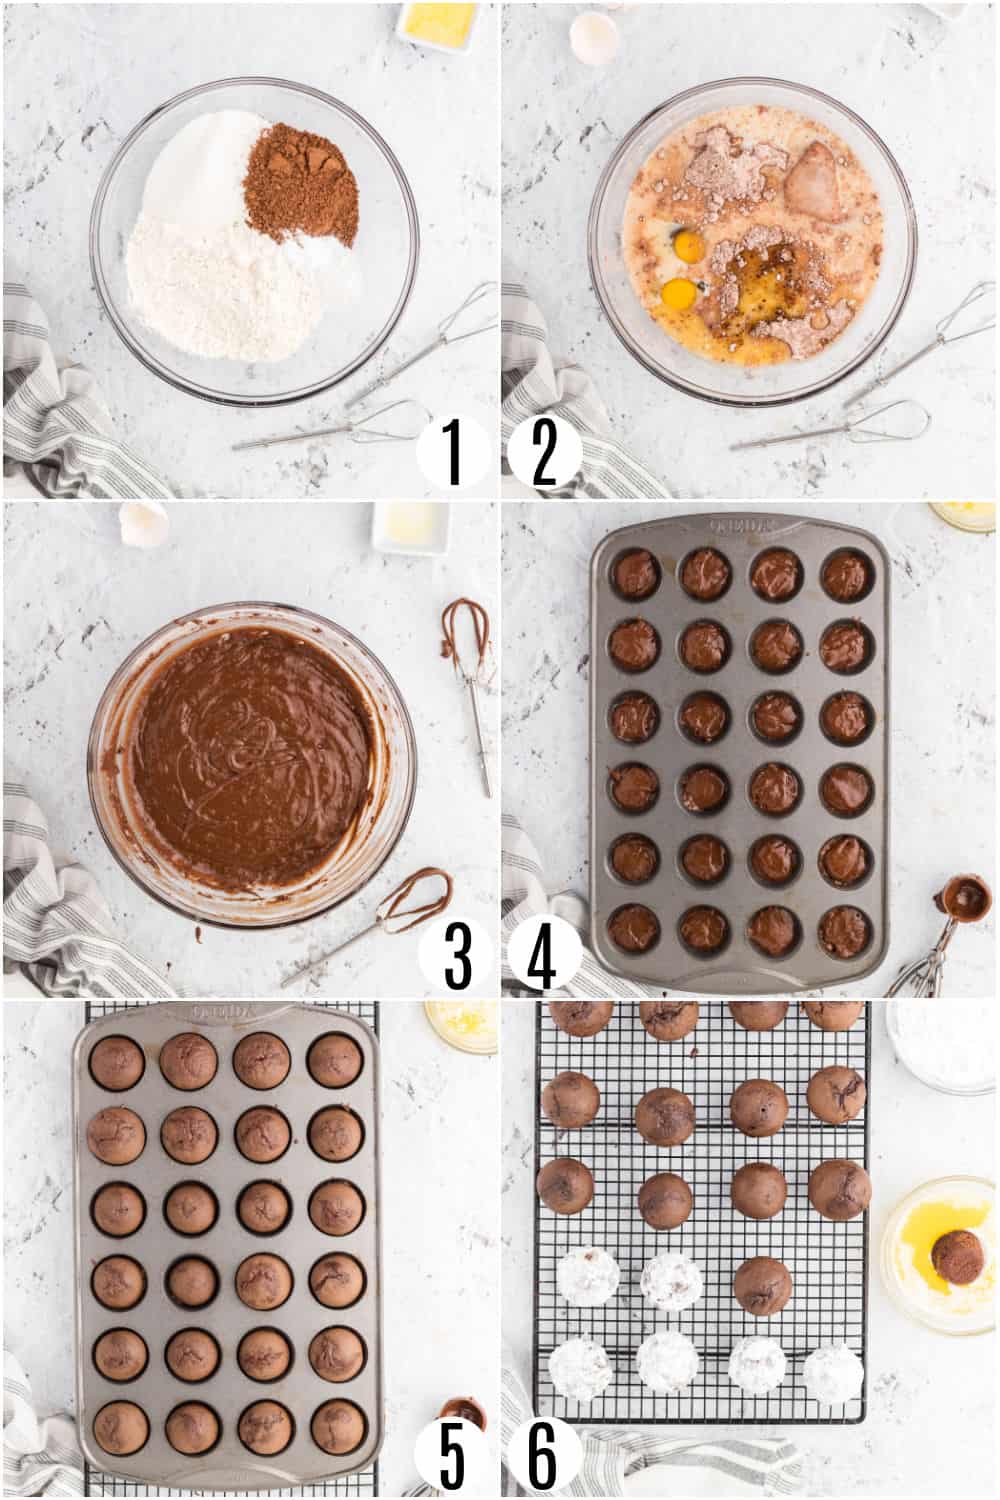 Step by step photos showing how to make chocolate donut holes.